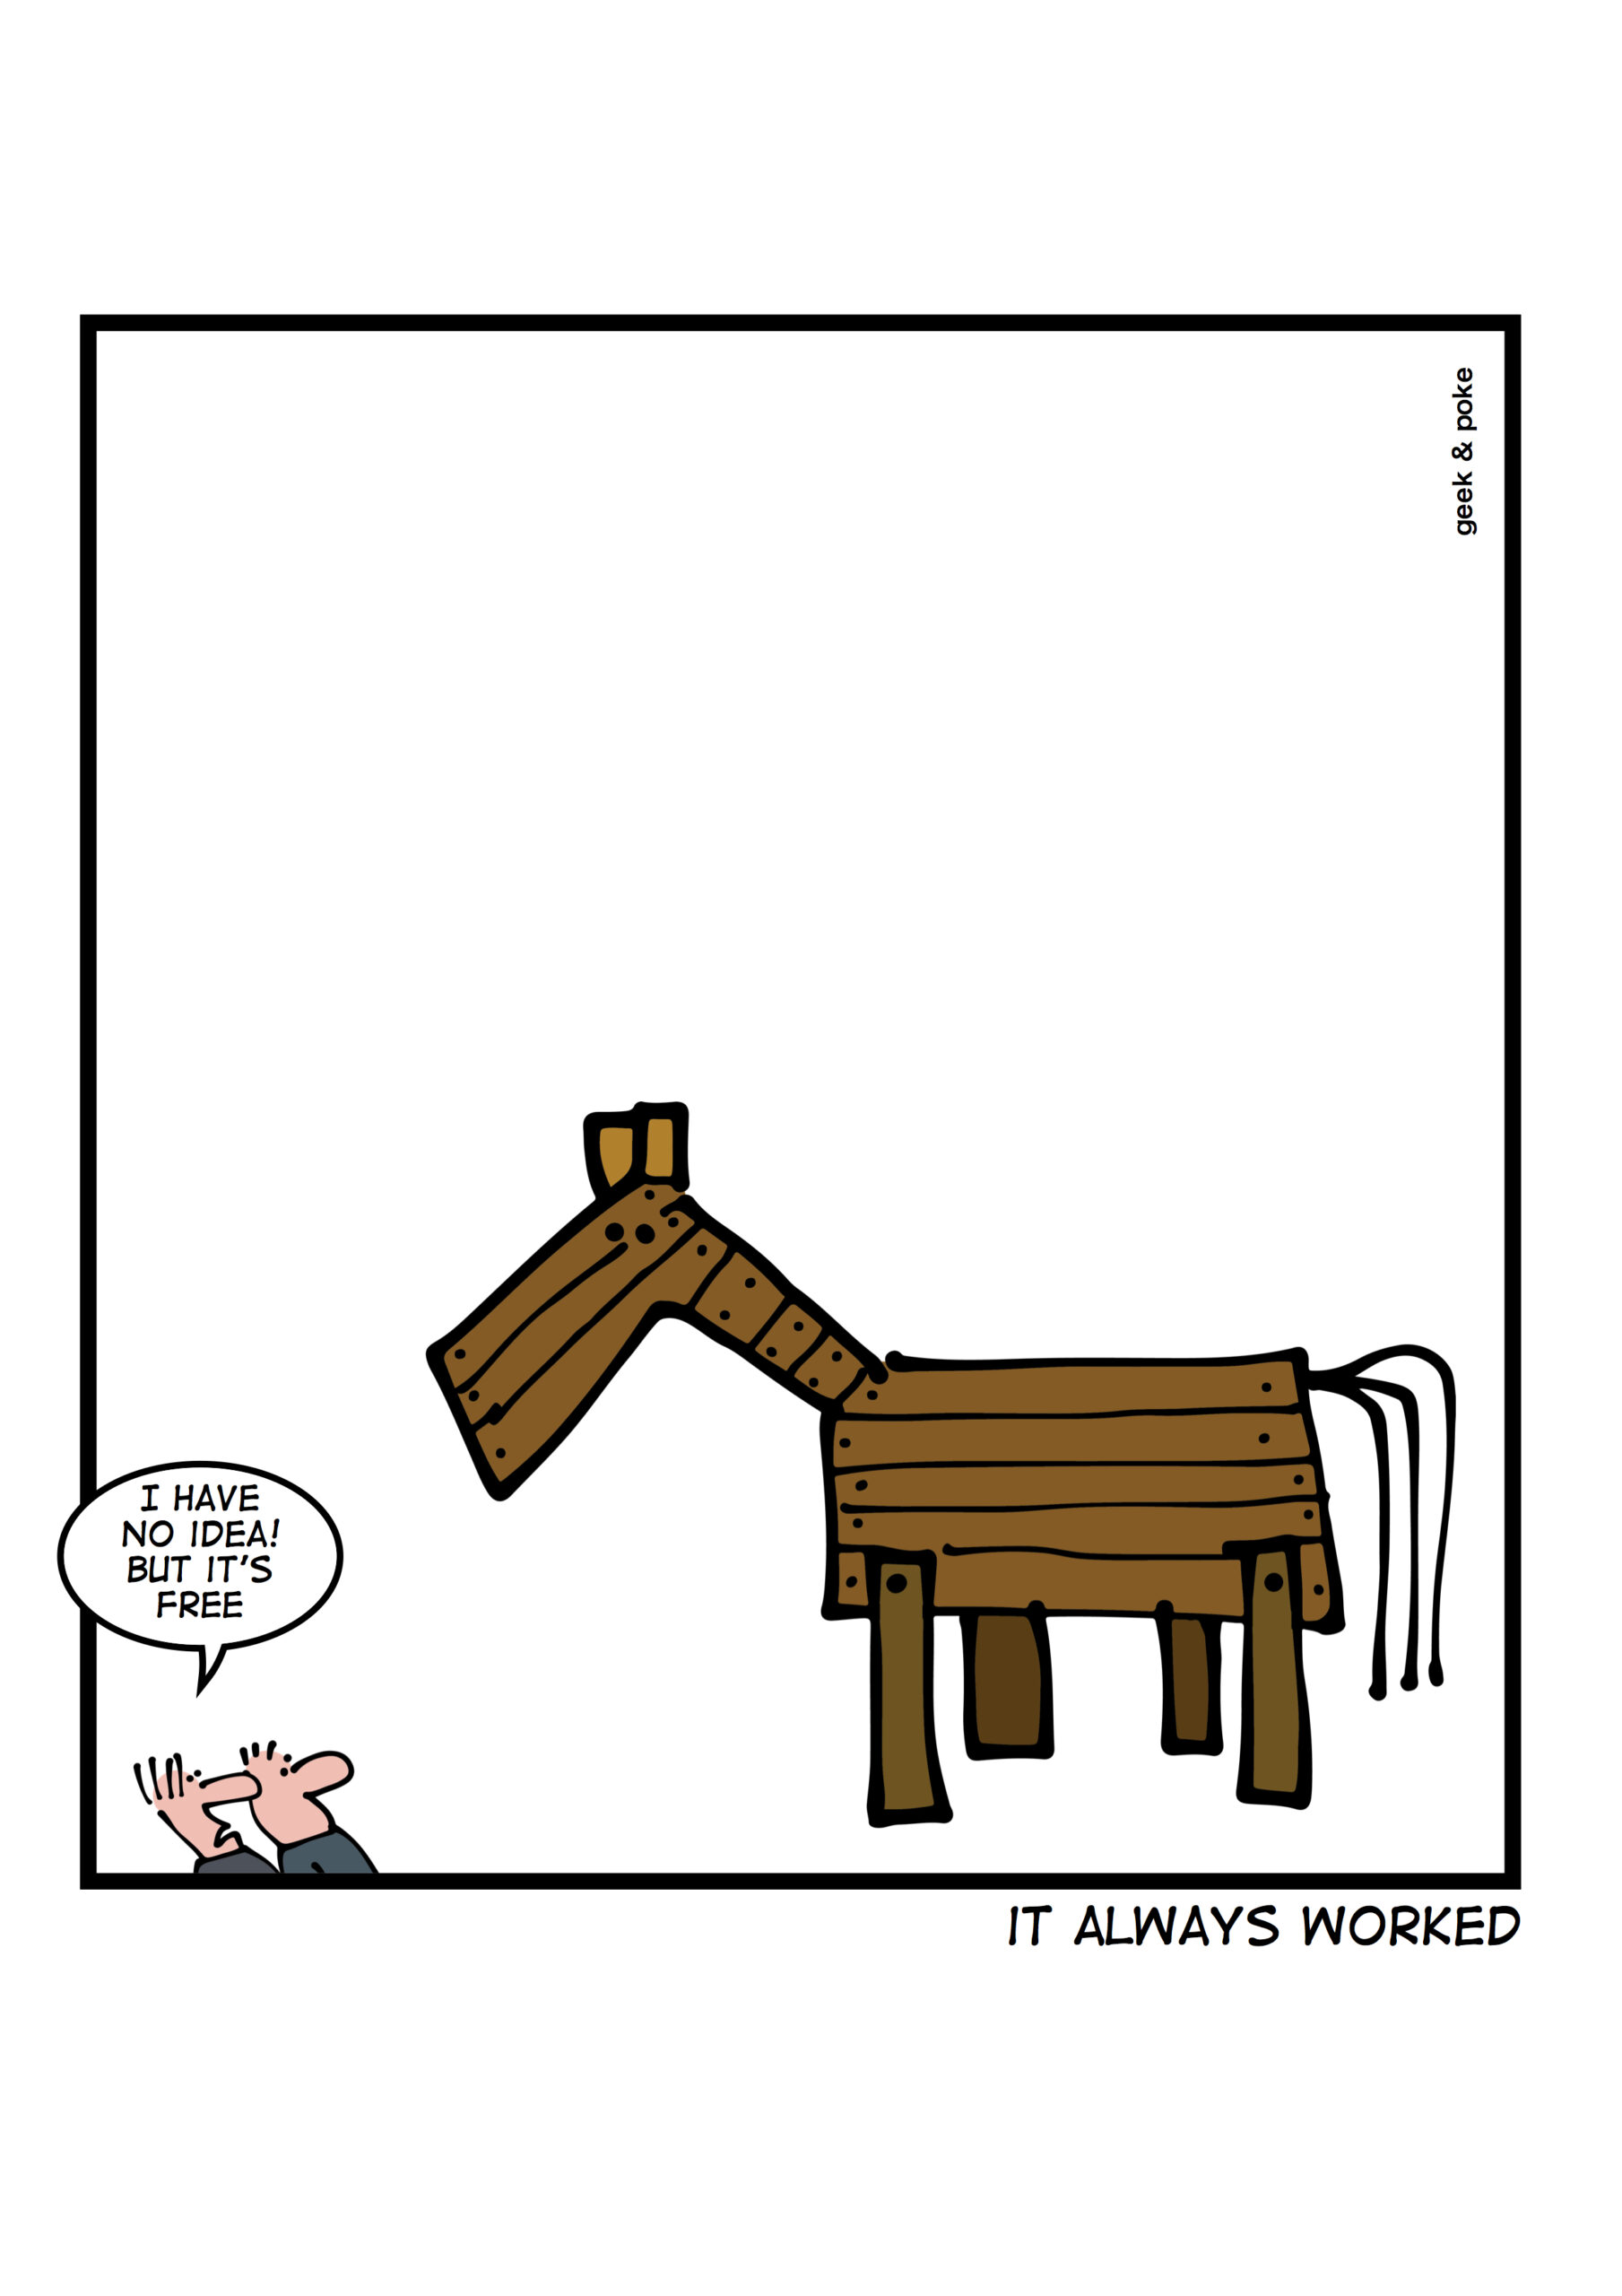 A geek & poke single-panel comic 'The History of "free"', showing two characters looking at a wooden horse statue. One of them says: "I have no idea! But it's free!" Under the panel is a phrase "It always worked"